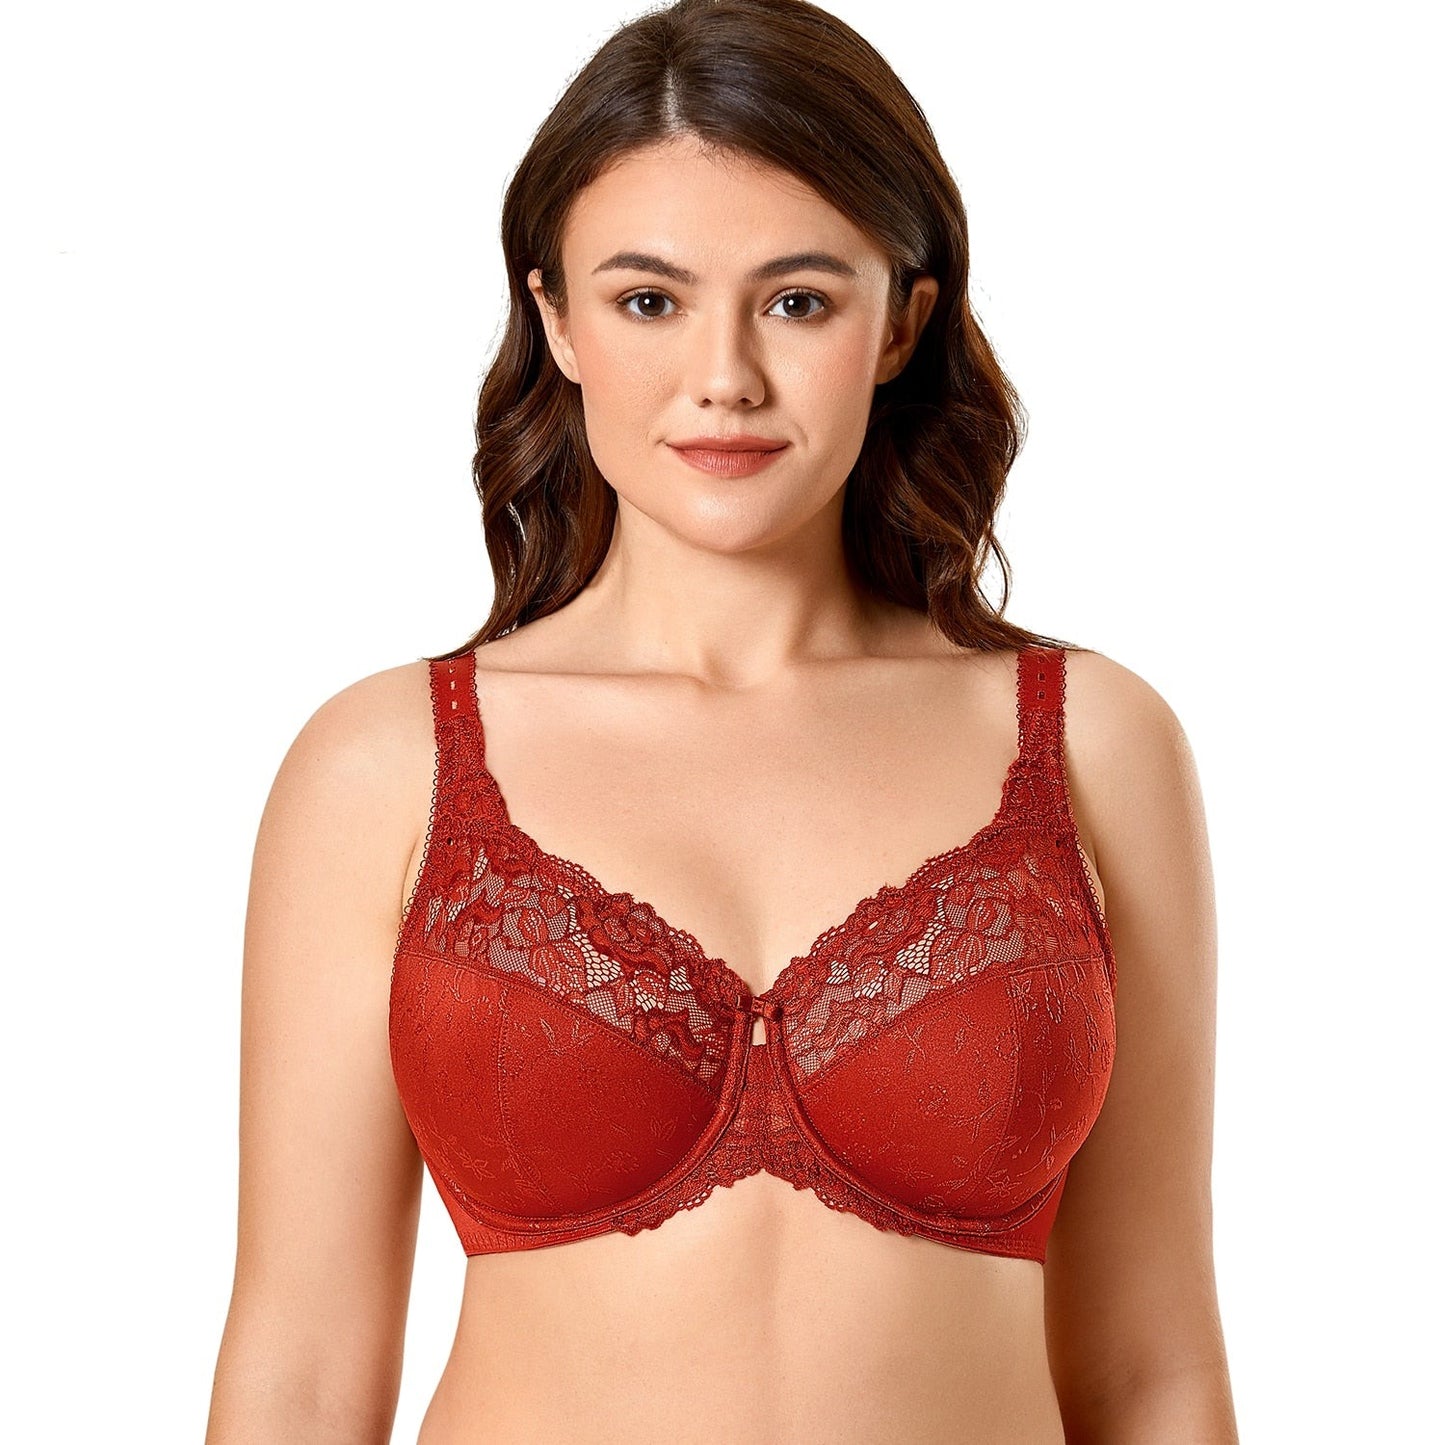 Plus size underwired non-padded lace bras 02 (Size 36/80 - 44/100, C - –  SSHK Shop by SS Online Trading Limited